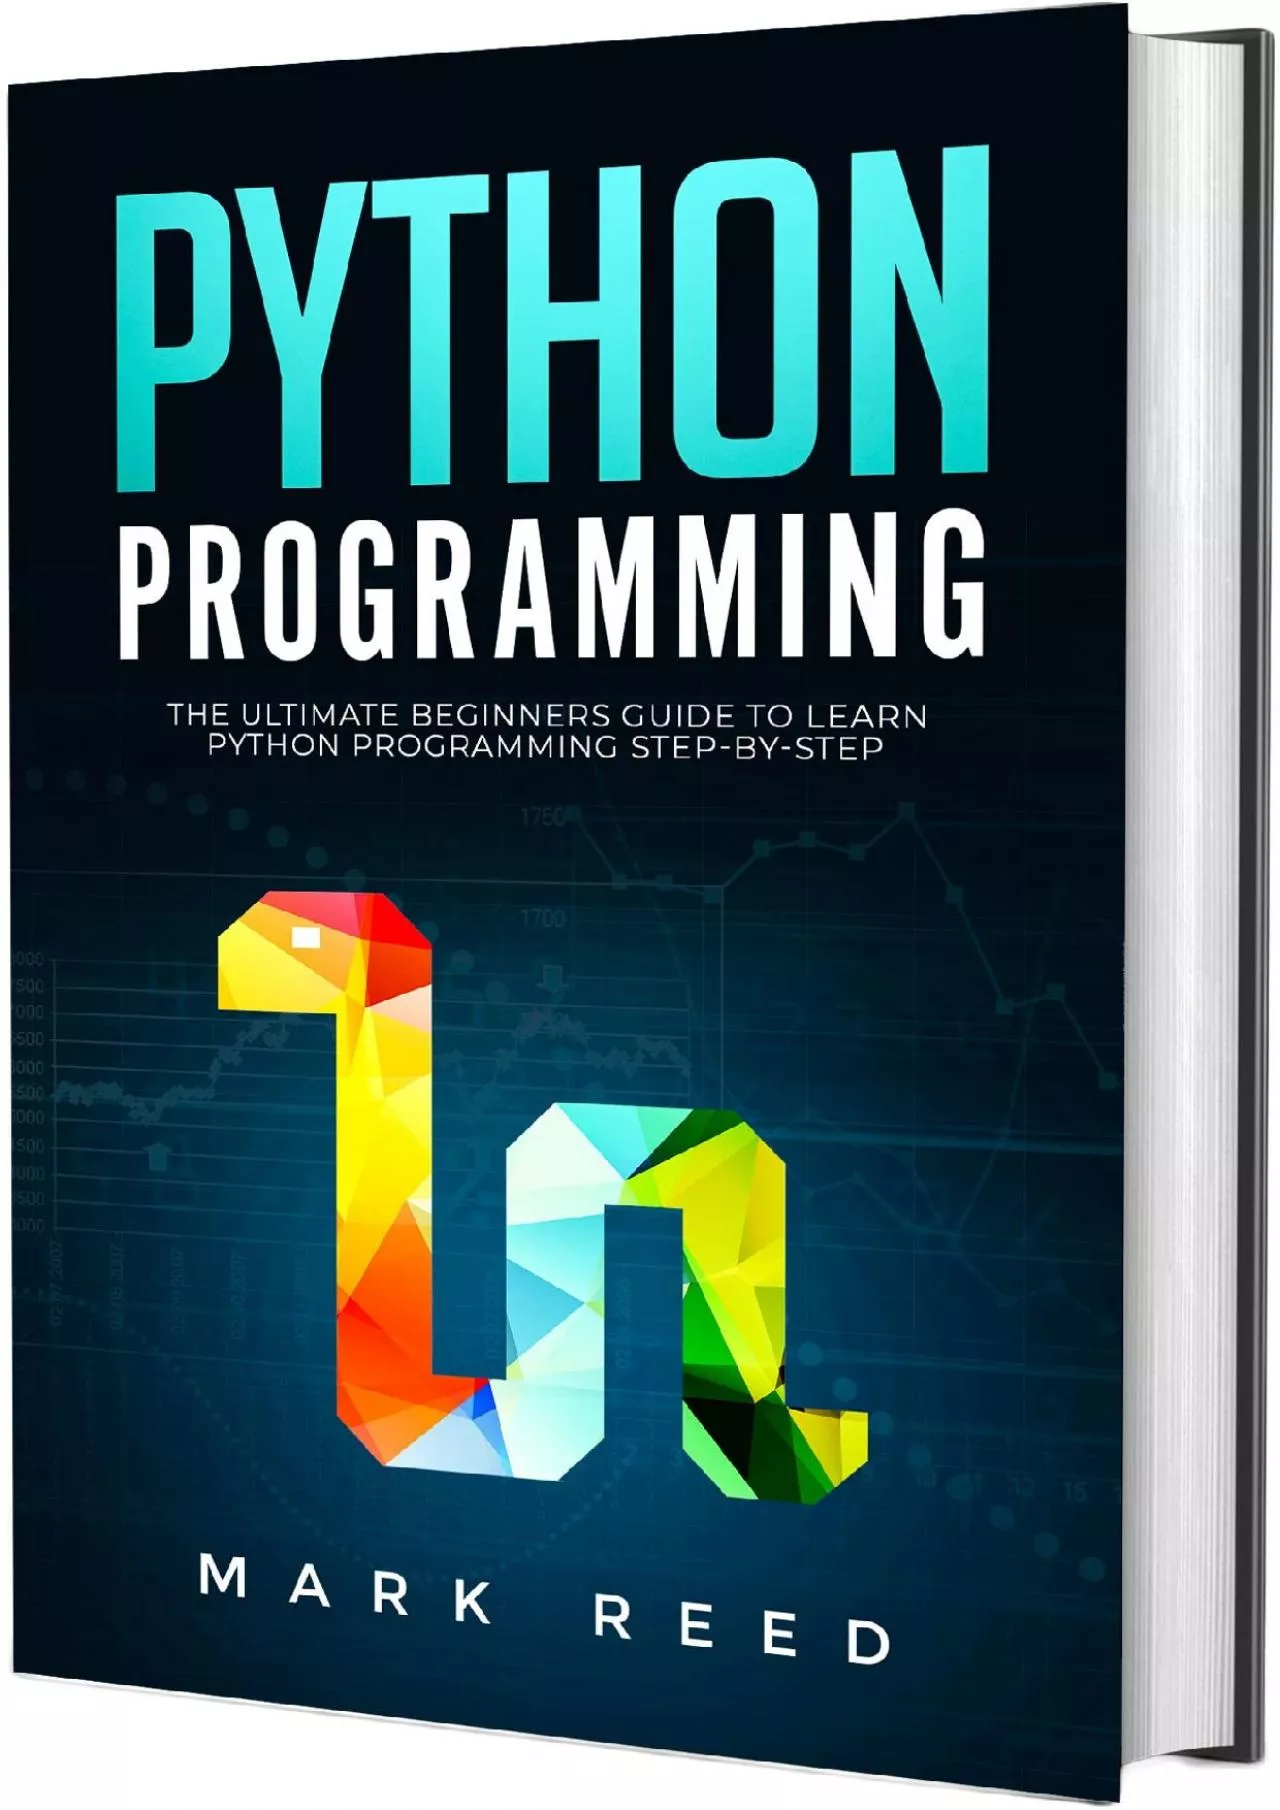 [FREE]-Python Programming: The Ultimate Beginners Guide to Learn Python Programming Step-by-Step